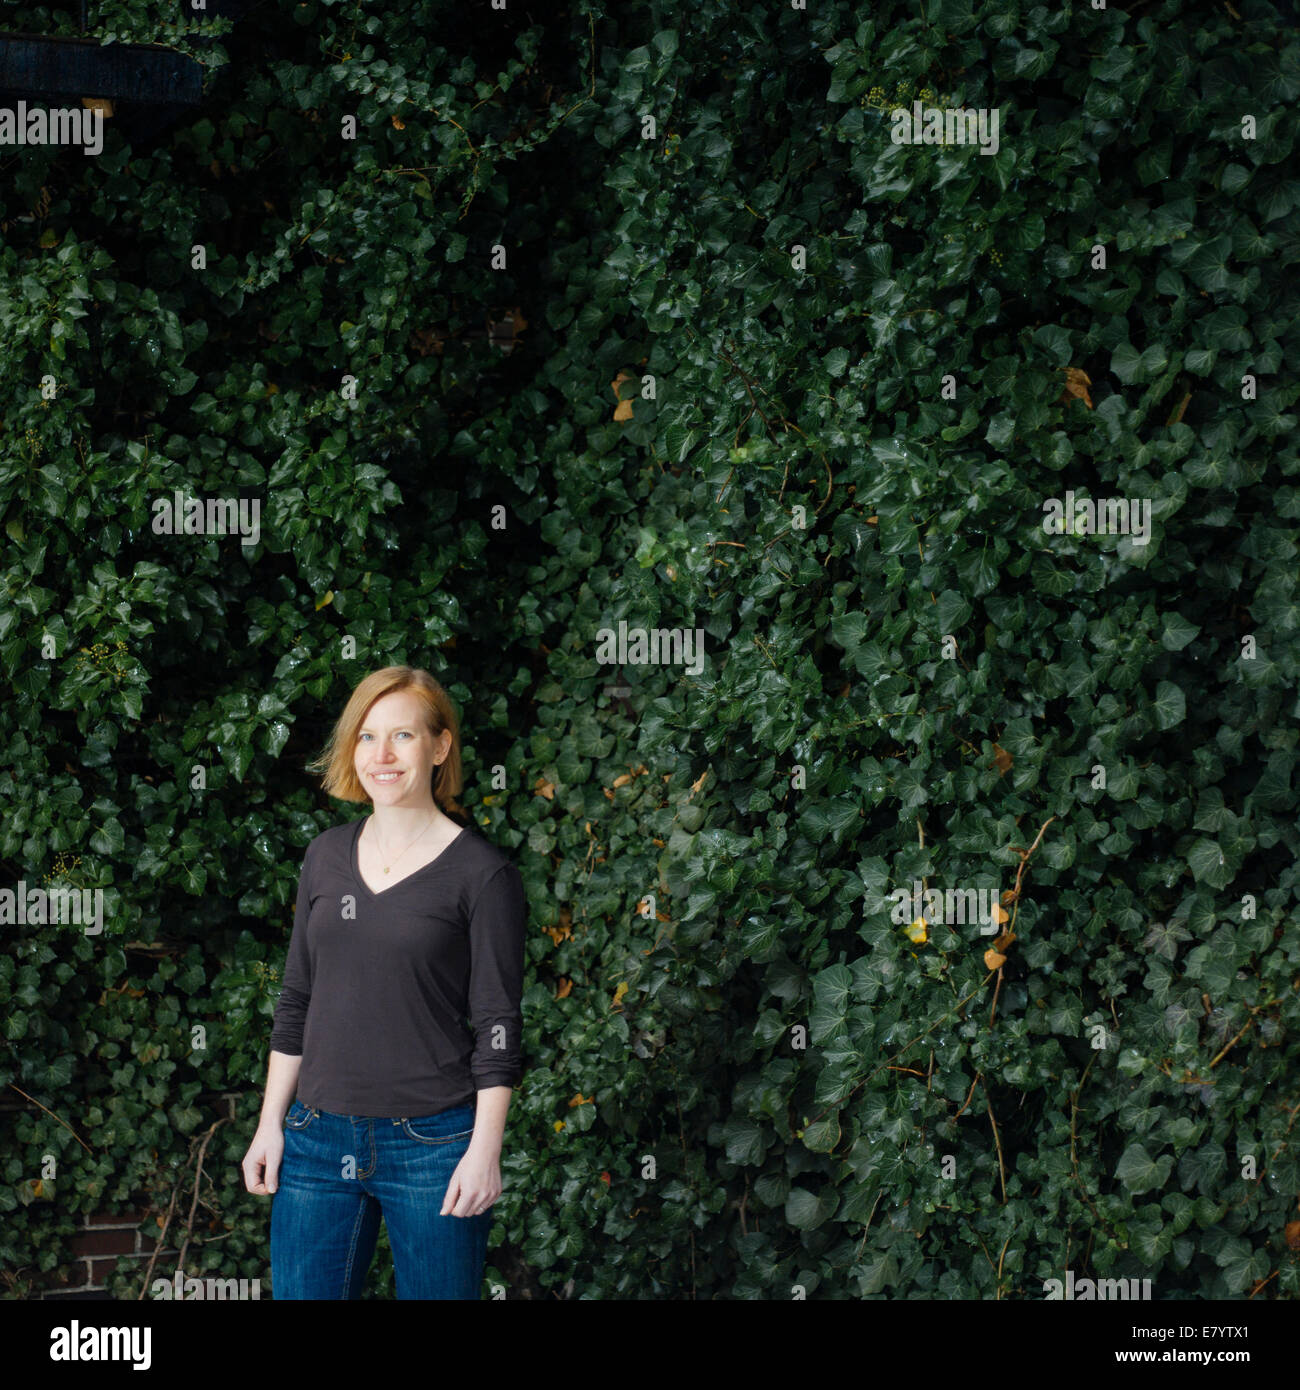 Woman standing against ivy foliage Stock Photo